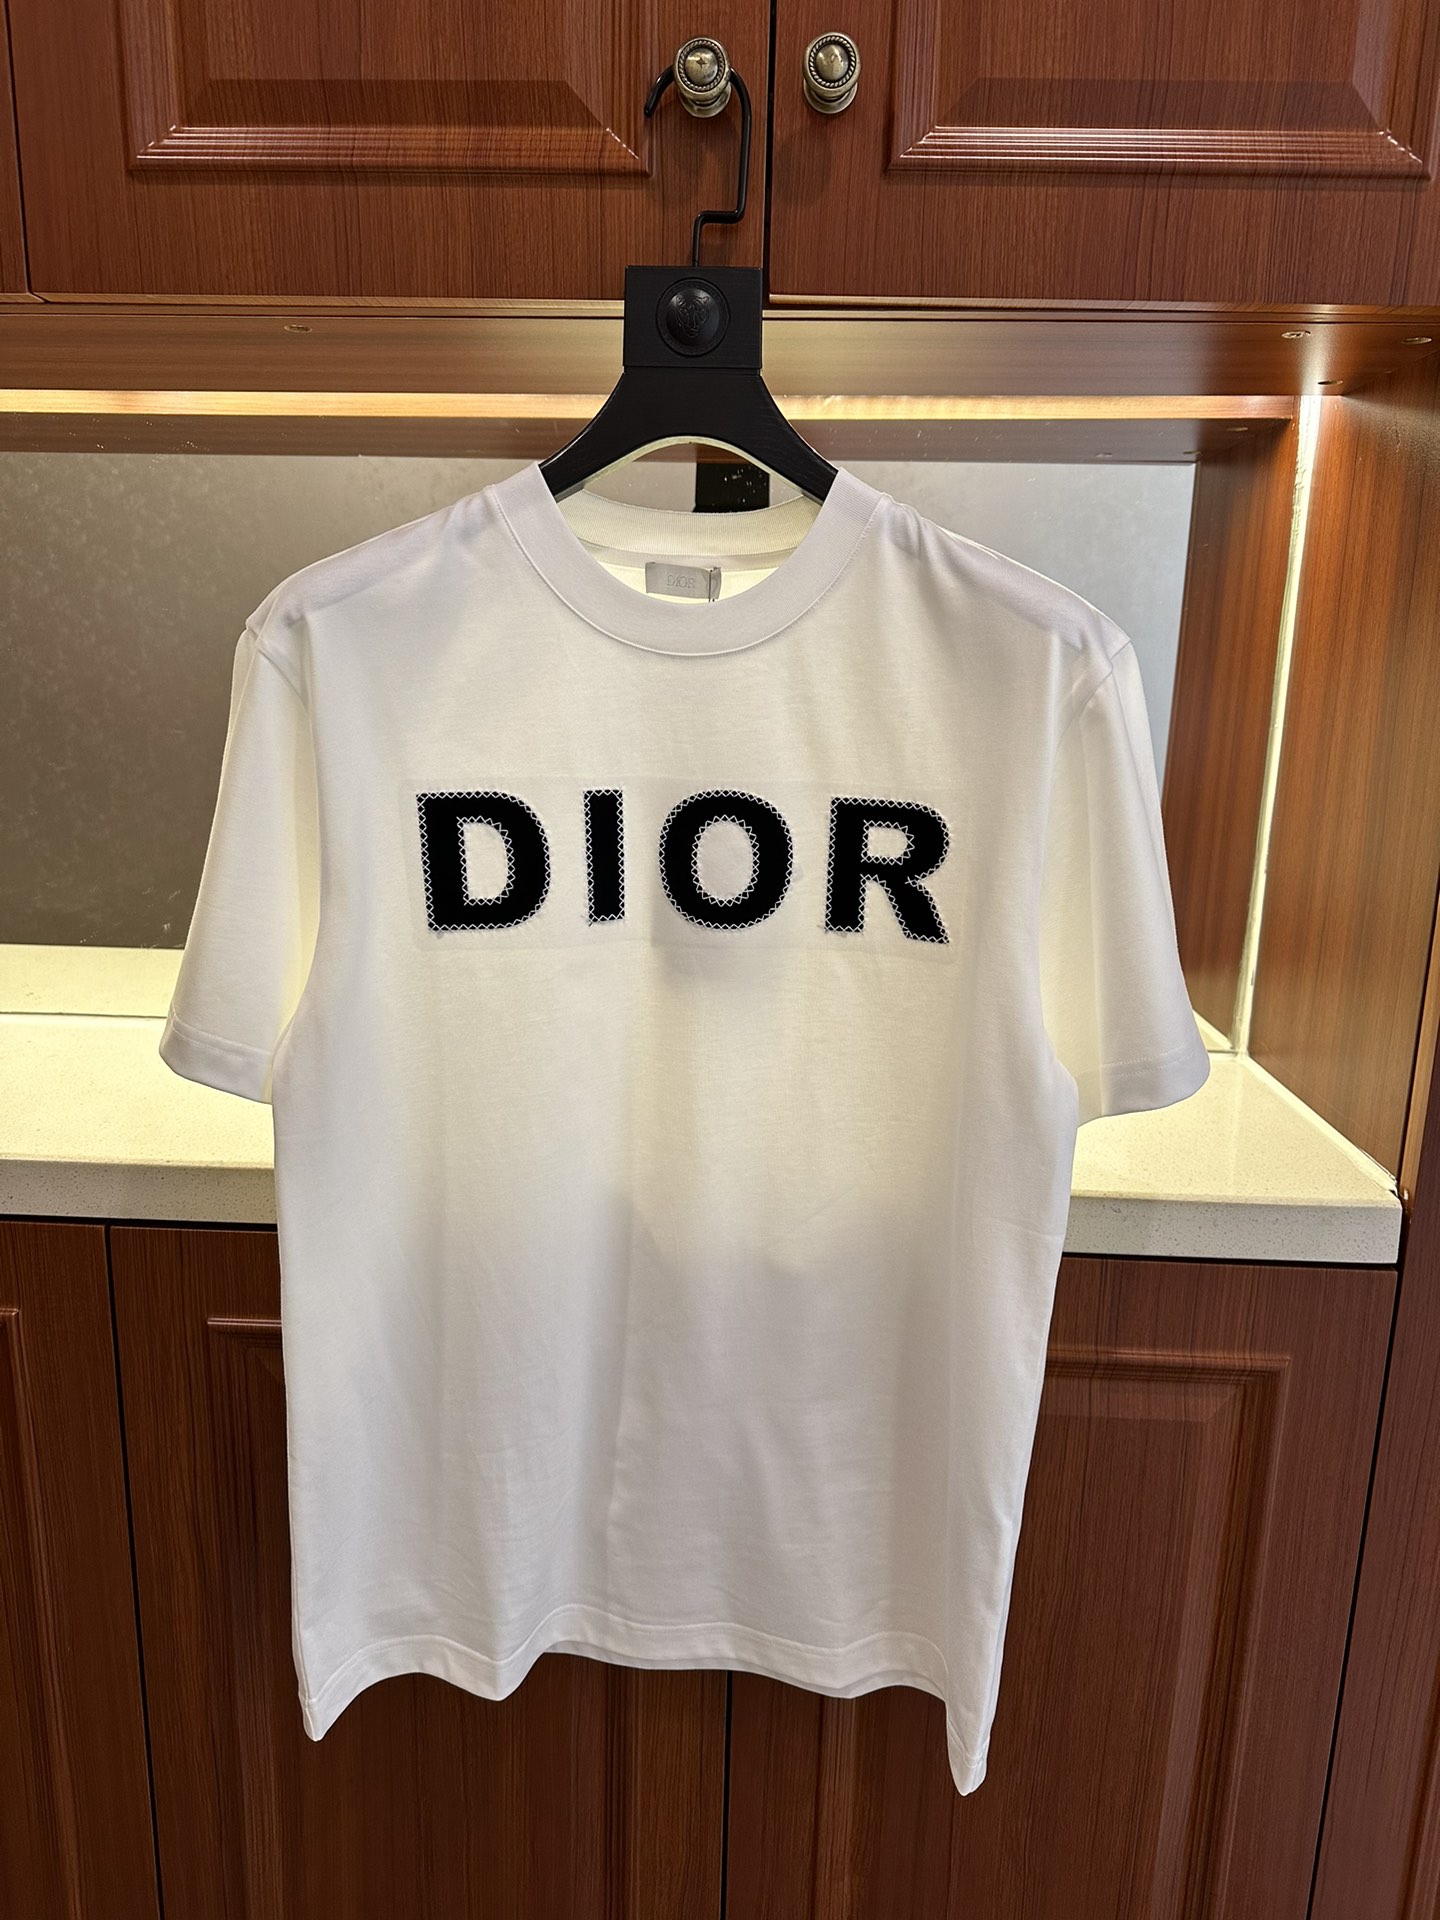 Dior Clothing T-Shirt Black Khaki White Embroidery Cotton Spring/Summer Collection Fashion Short Sleeve